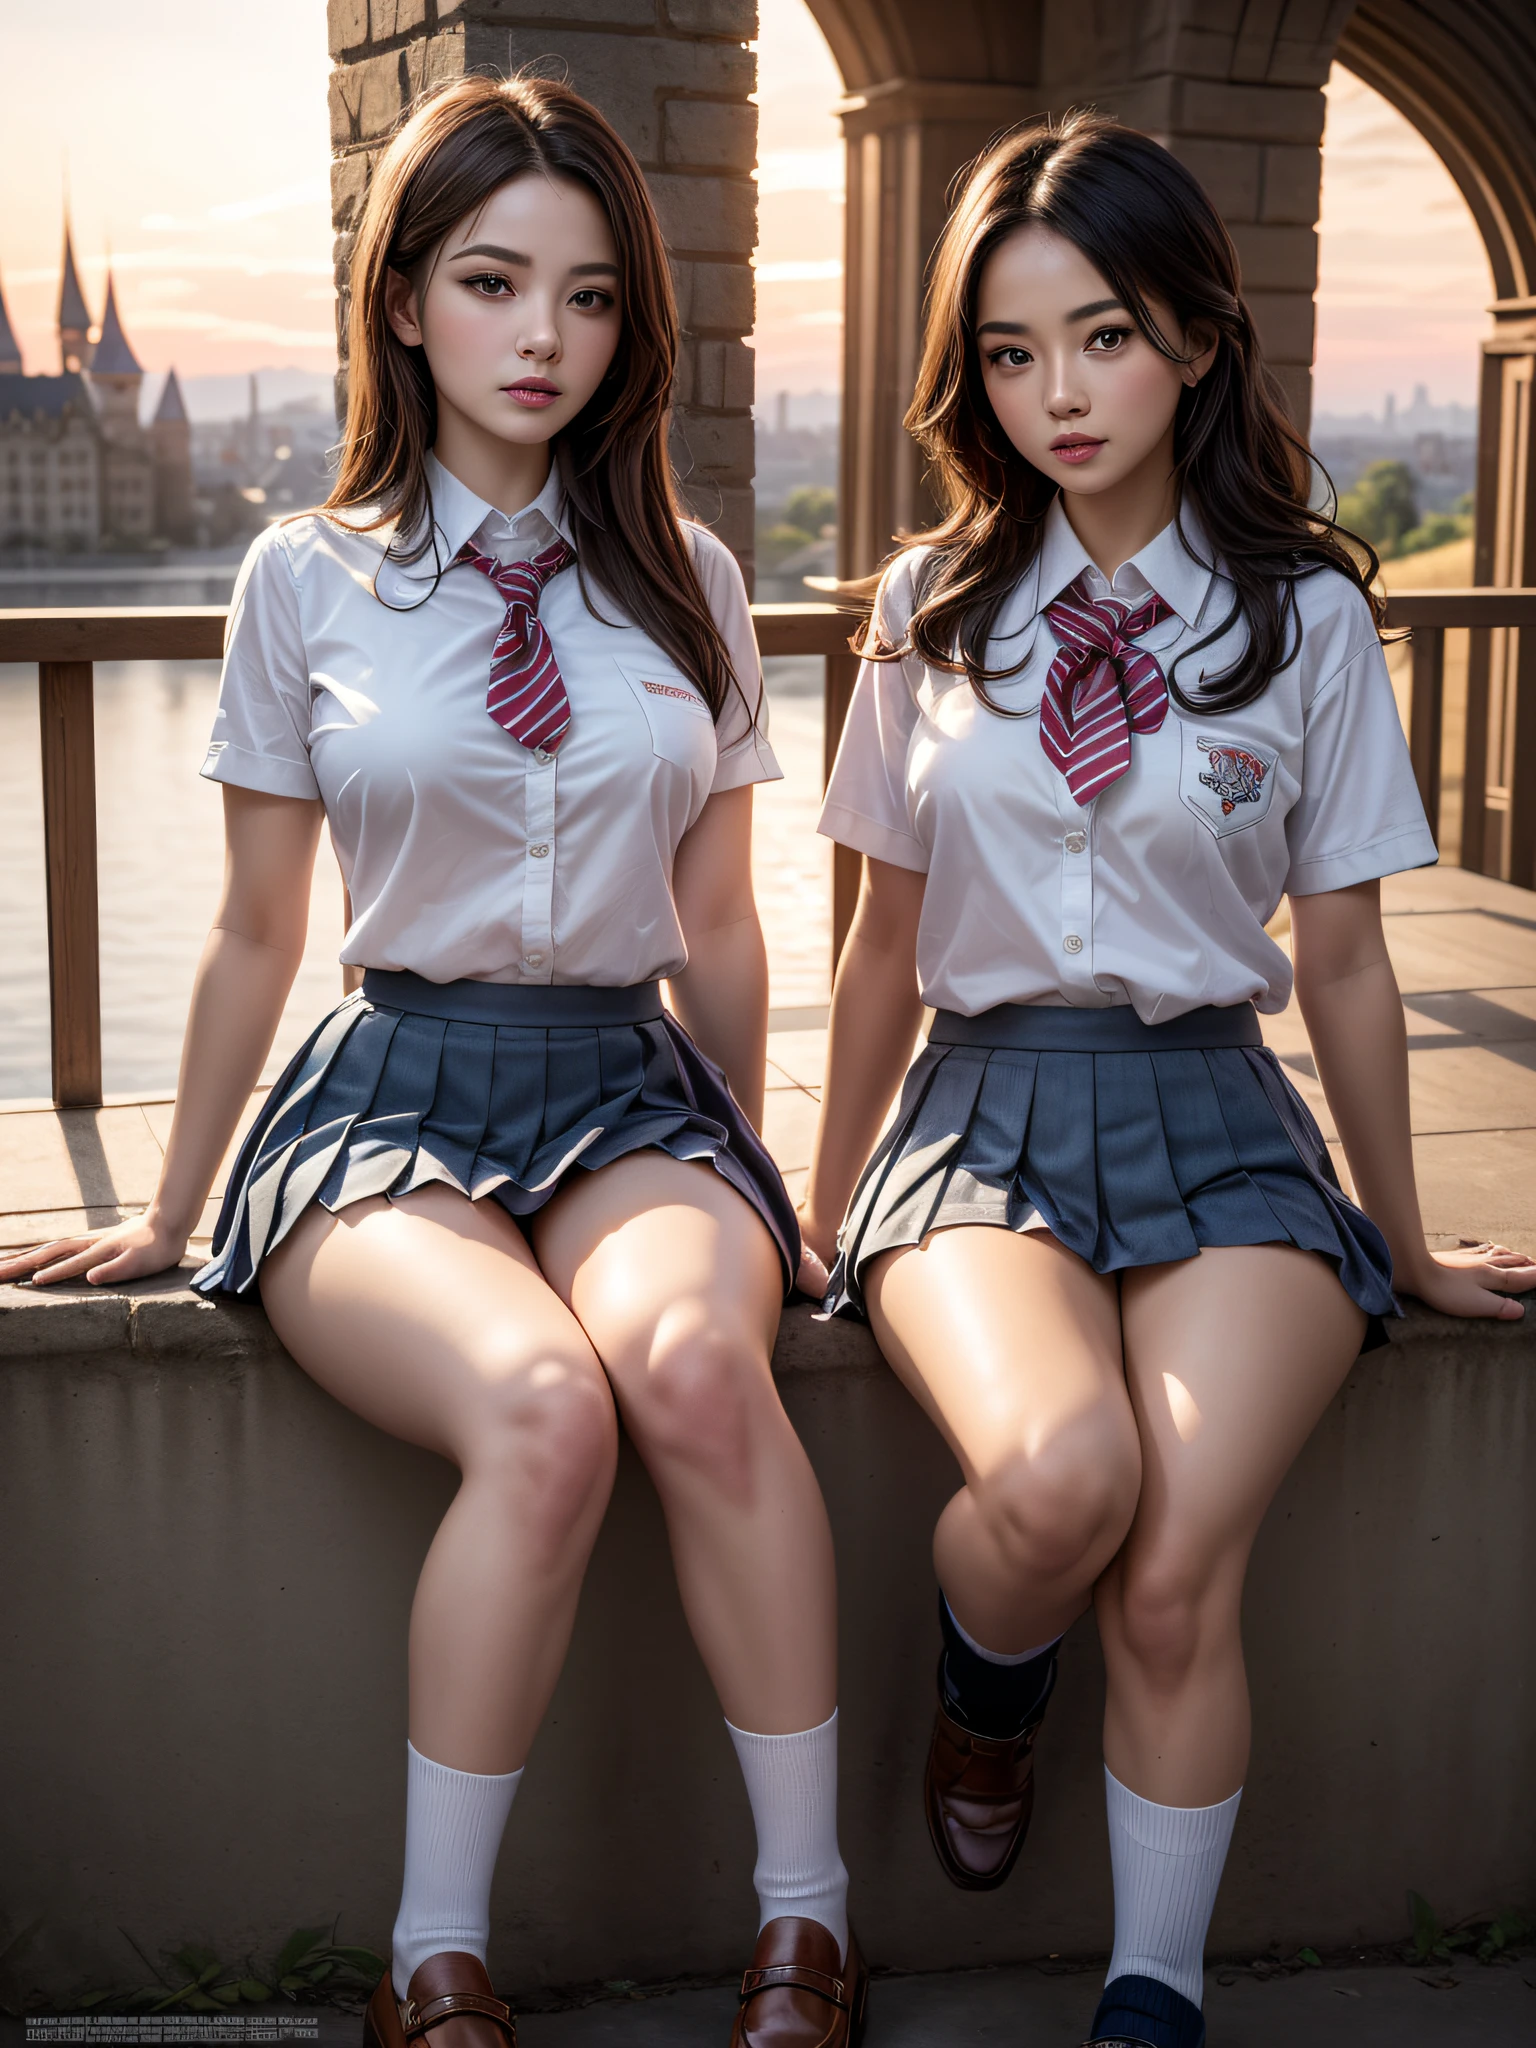 (2girls:1.5), Extremely cute, Amazing face and eyes, (Best Quality:1.4), (hyper quality), (Ultra-detailed), (school uniform, pleated mini skirt:1.5), (beautiful breasts:1.1), (slender body:1.1), Authentic skin texture, bright and shiny lips, Beautiful Goddess Advent, (sitting, spread legs open), (pubick hair, cameltoe), Beautiful background, Golden ratio, conceptual art, Super Detail, ccurate, high details, Outdoors, (Beautiful Giant Castle:1.5), Sexy Art, Surrounded by beautiful sunsets, dazzling lights, Super delicate illustration details, Highly detailed CG integrated 8k wallpapers, RAW Photos, professional photograpy, Cinematic lighting, Super gorgeous illustrations, depth of field,